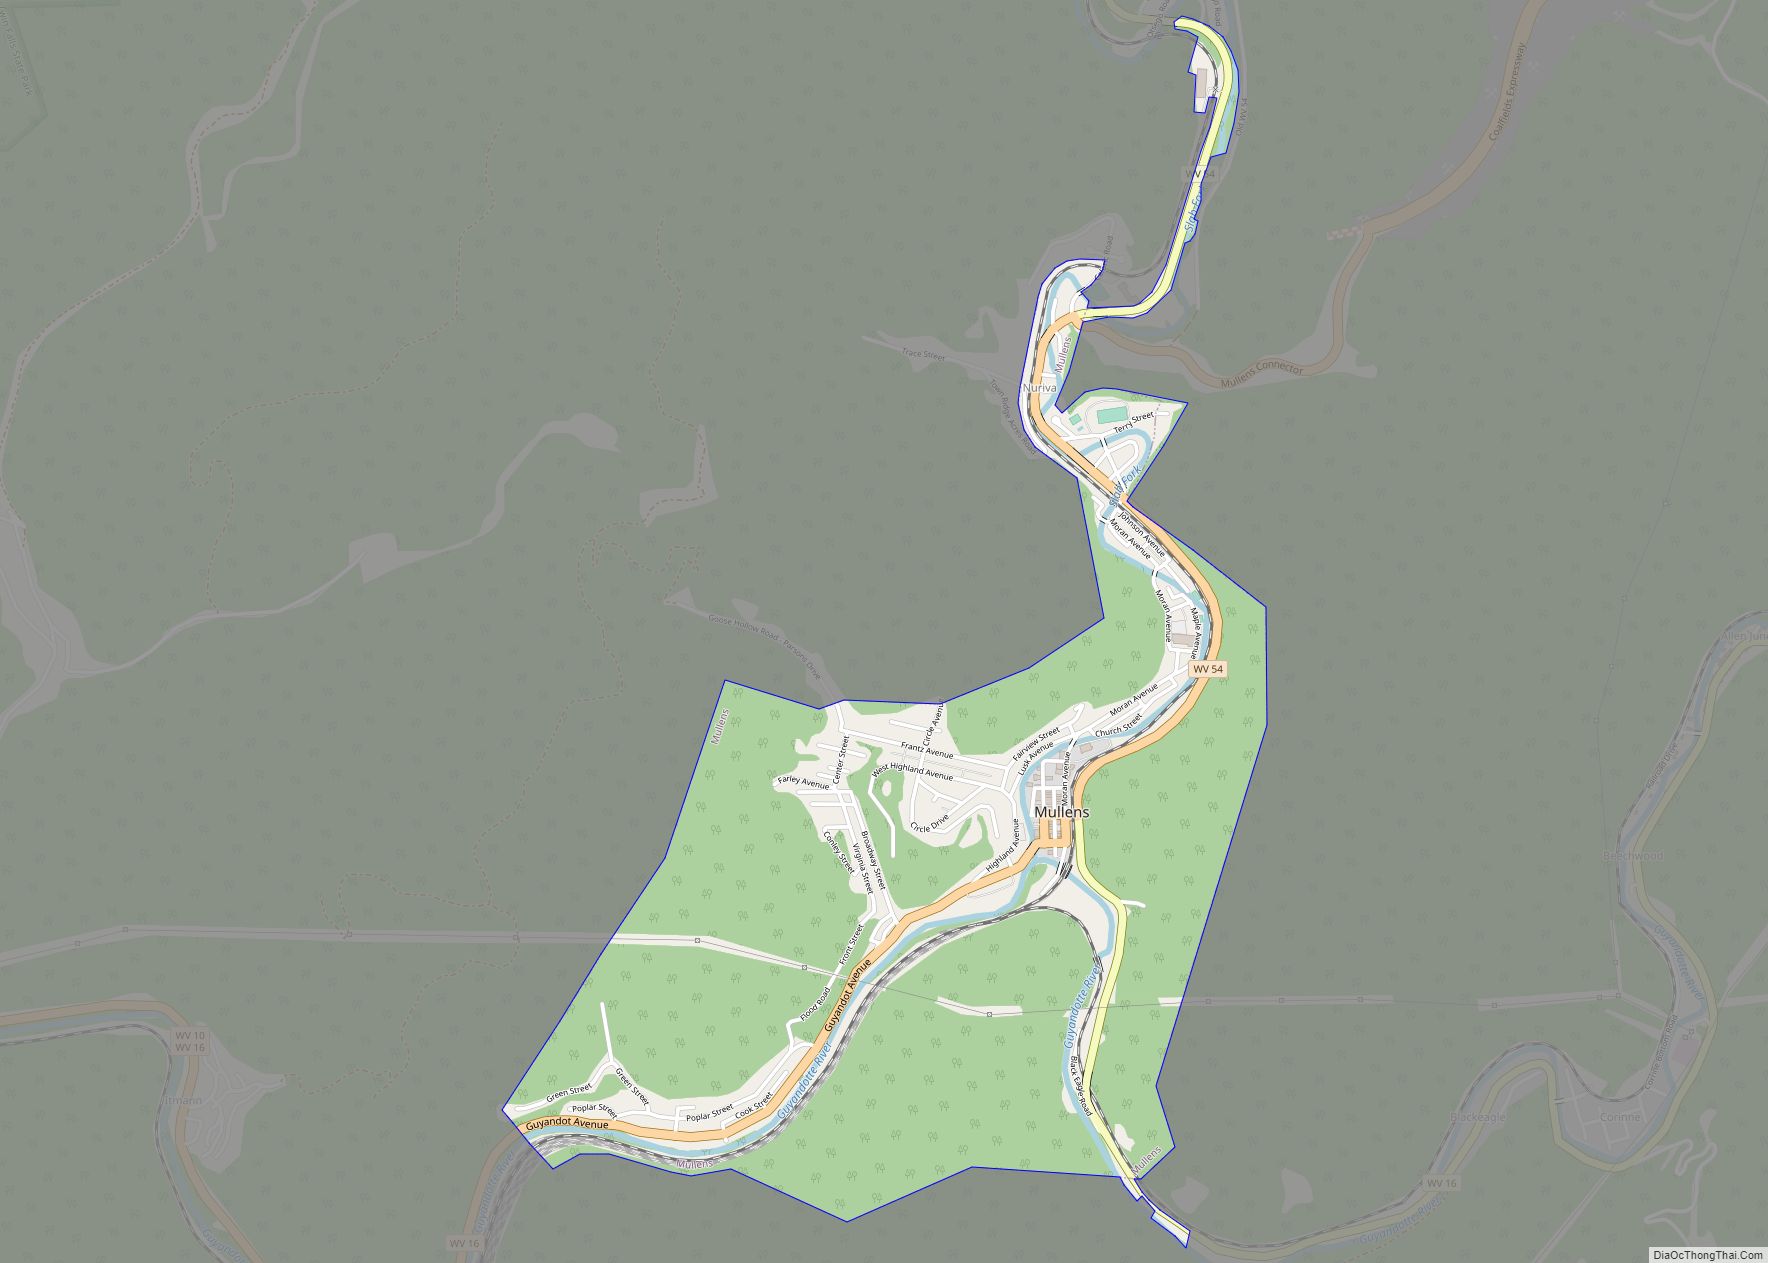 Map of Mullens city